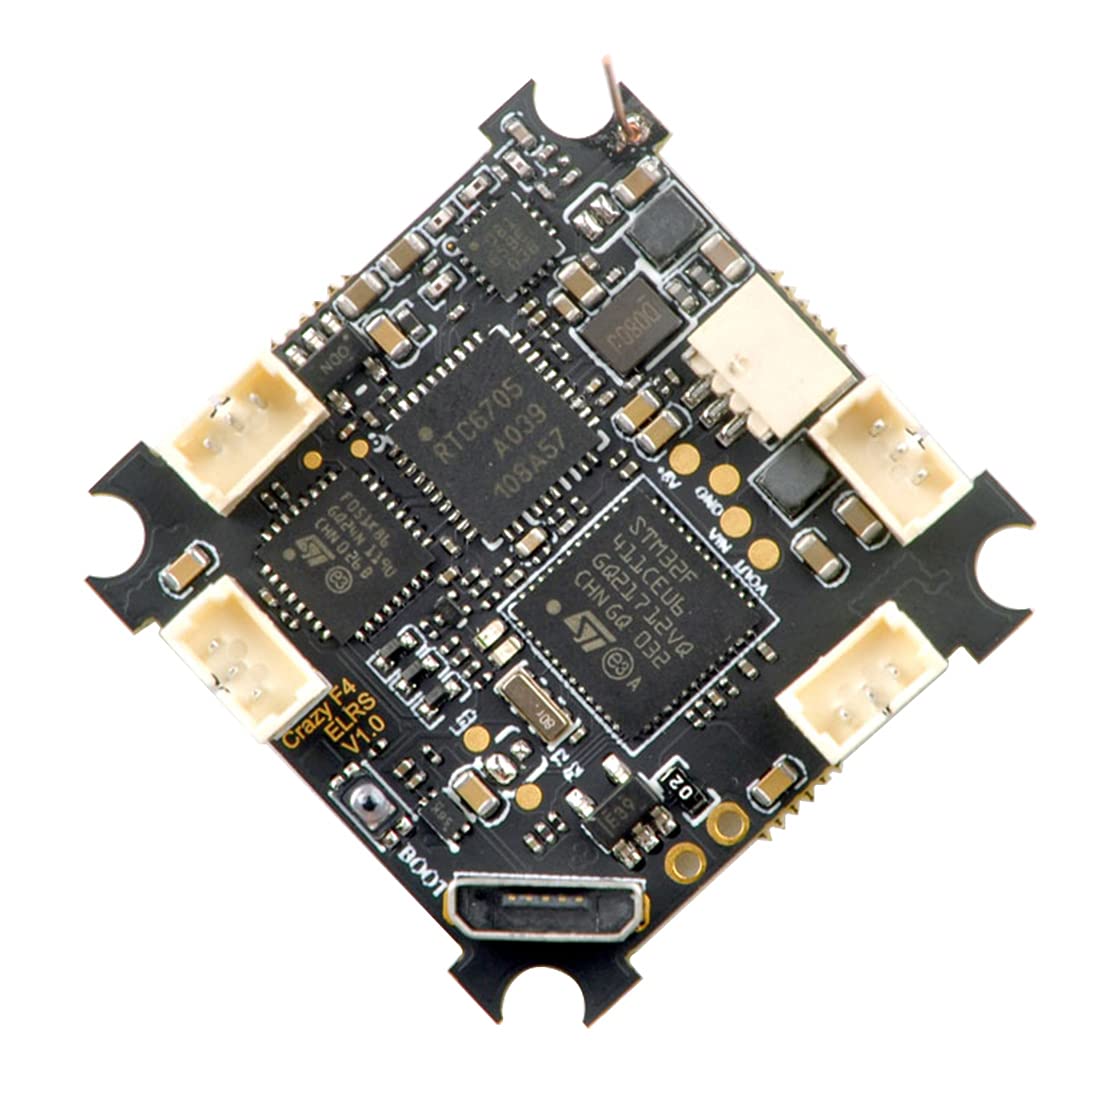 HAPPYMODEL CrazyF4 ELRS AIO 5in1 Flight Controller 1S Built-in 900MHz ELRS Receiver for DIT FPV Racing Drone 915Mhz 送料